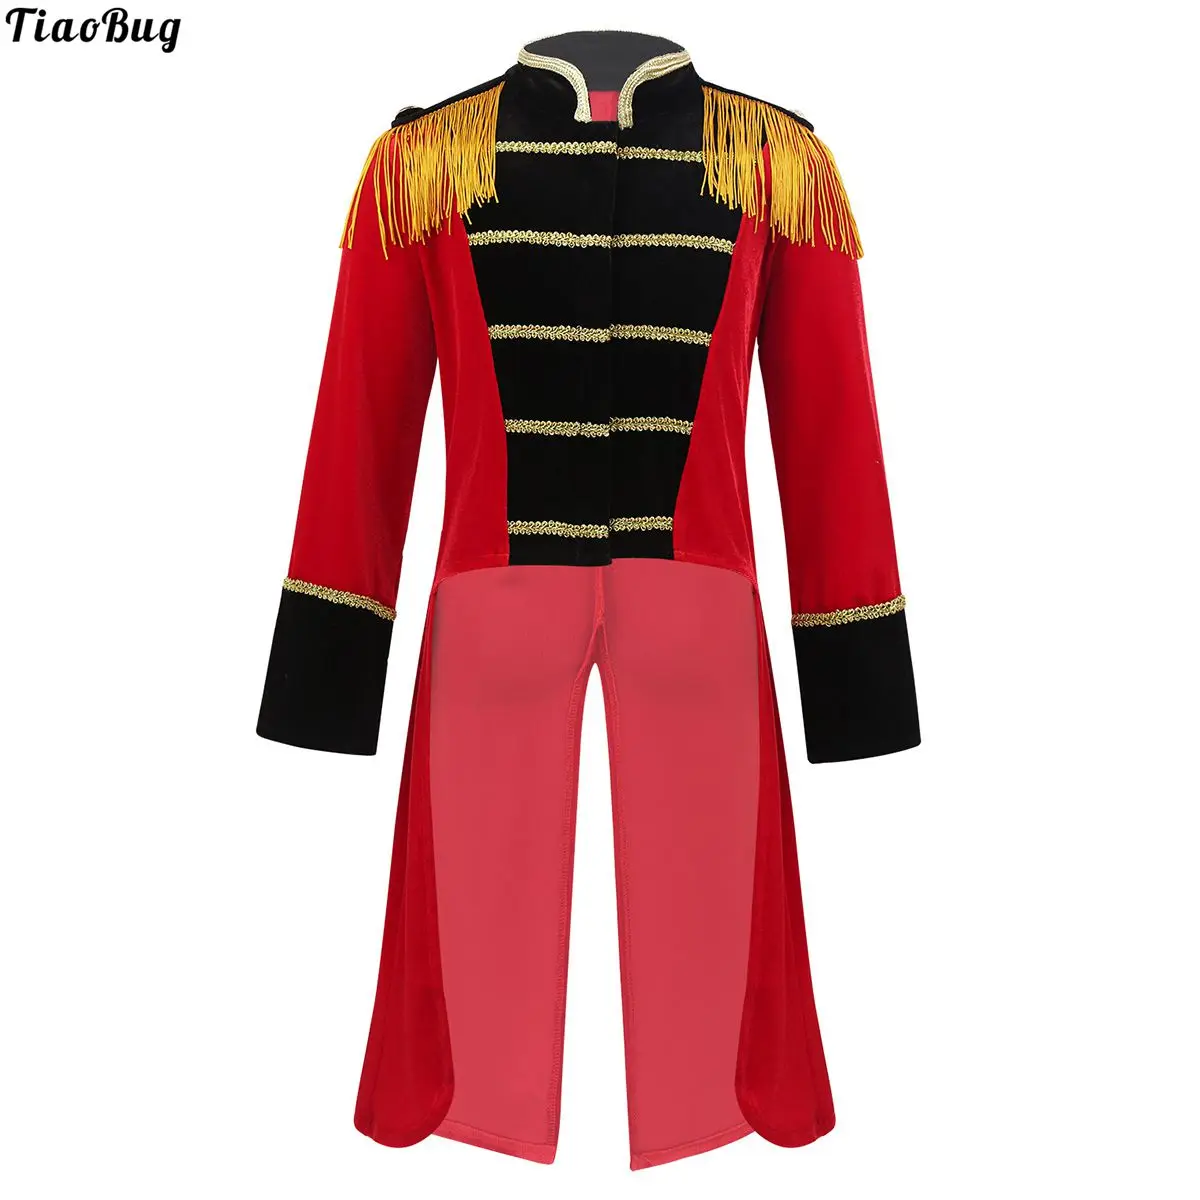 

Kids Boys Circus Ringmaster Halloween Cosplay Party Costume Long Sleeves Stand Collar Fringes Gold Trimmings Tailcoat Jacket